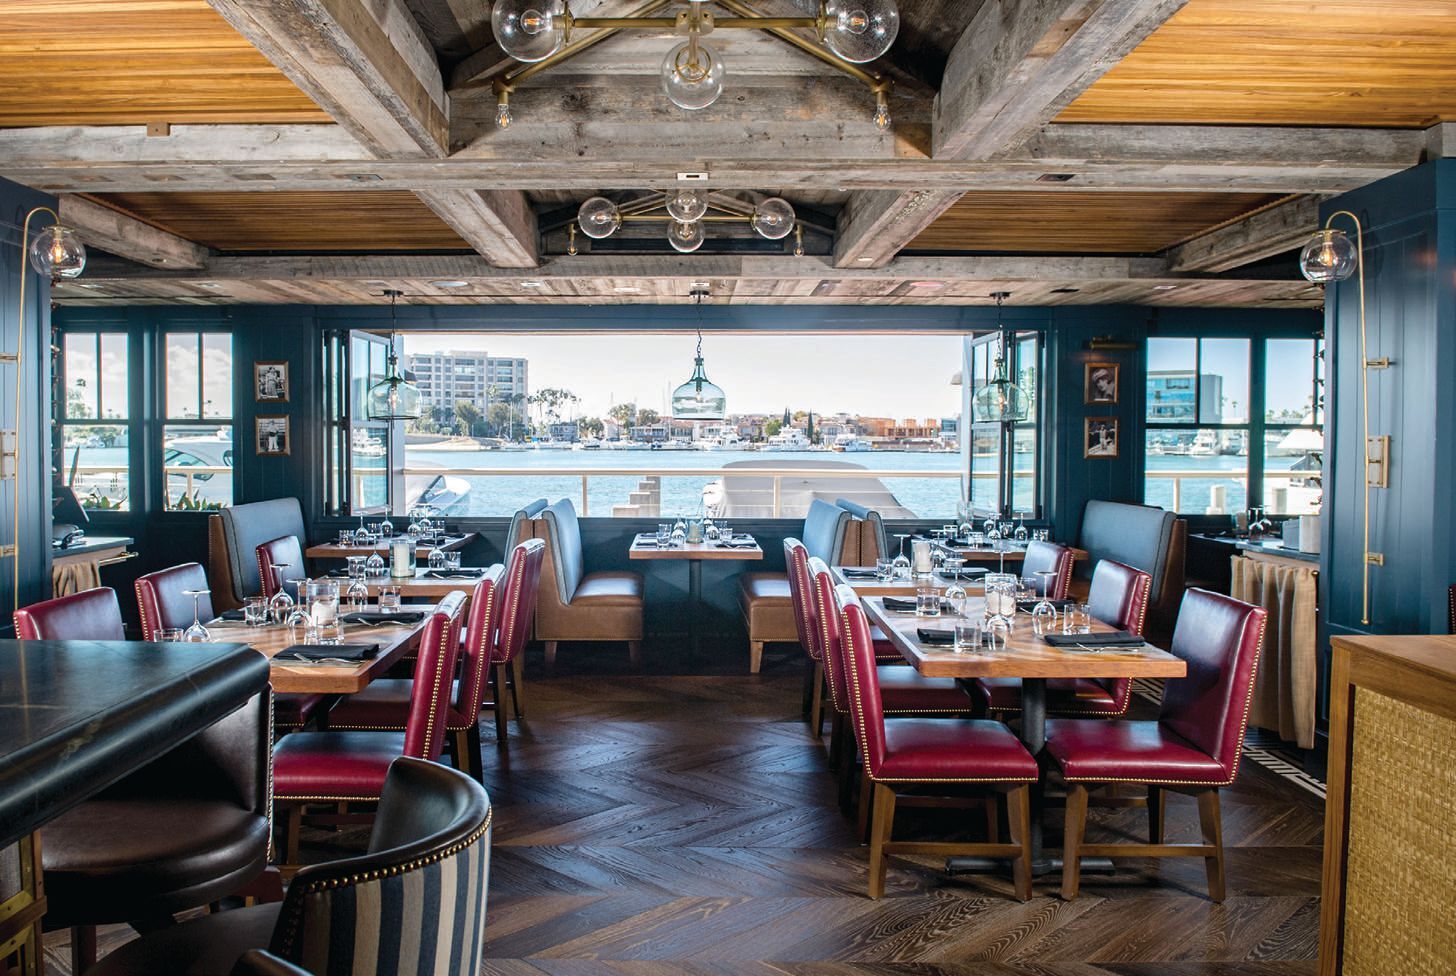 The waterfront dining room at Louie’s by the Bay PHOTO BY: ANNE WATSON